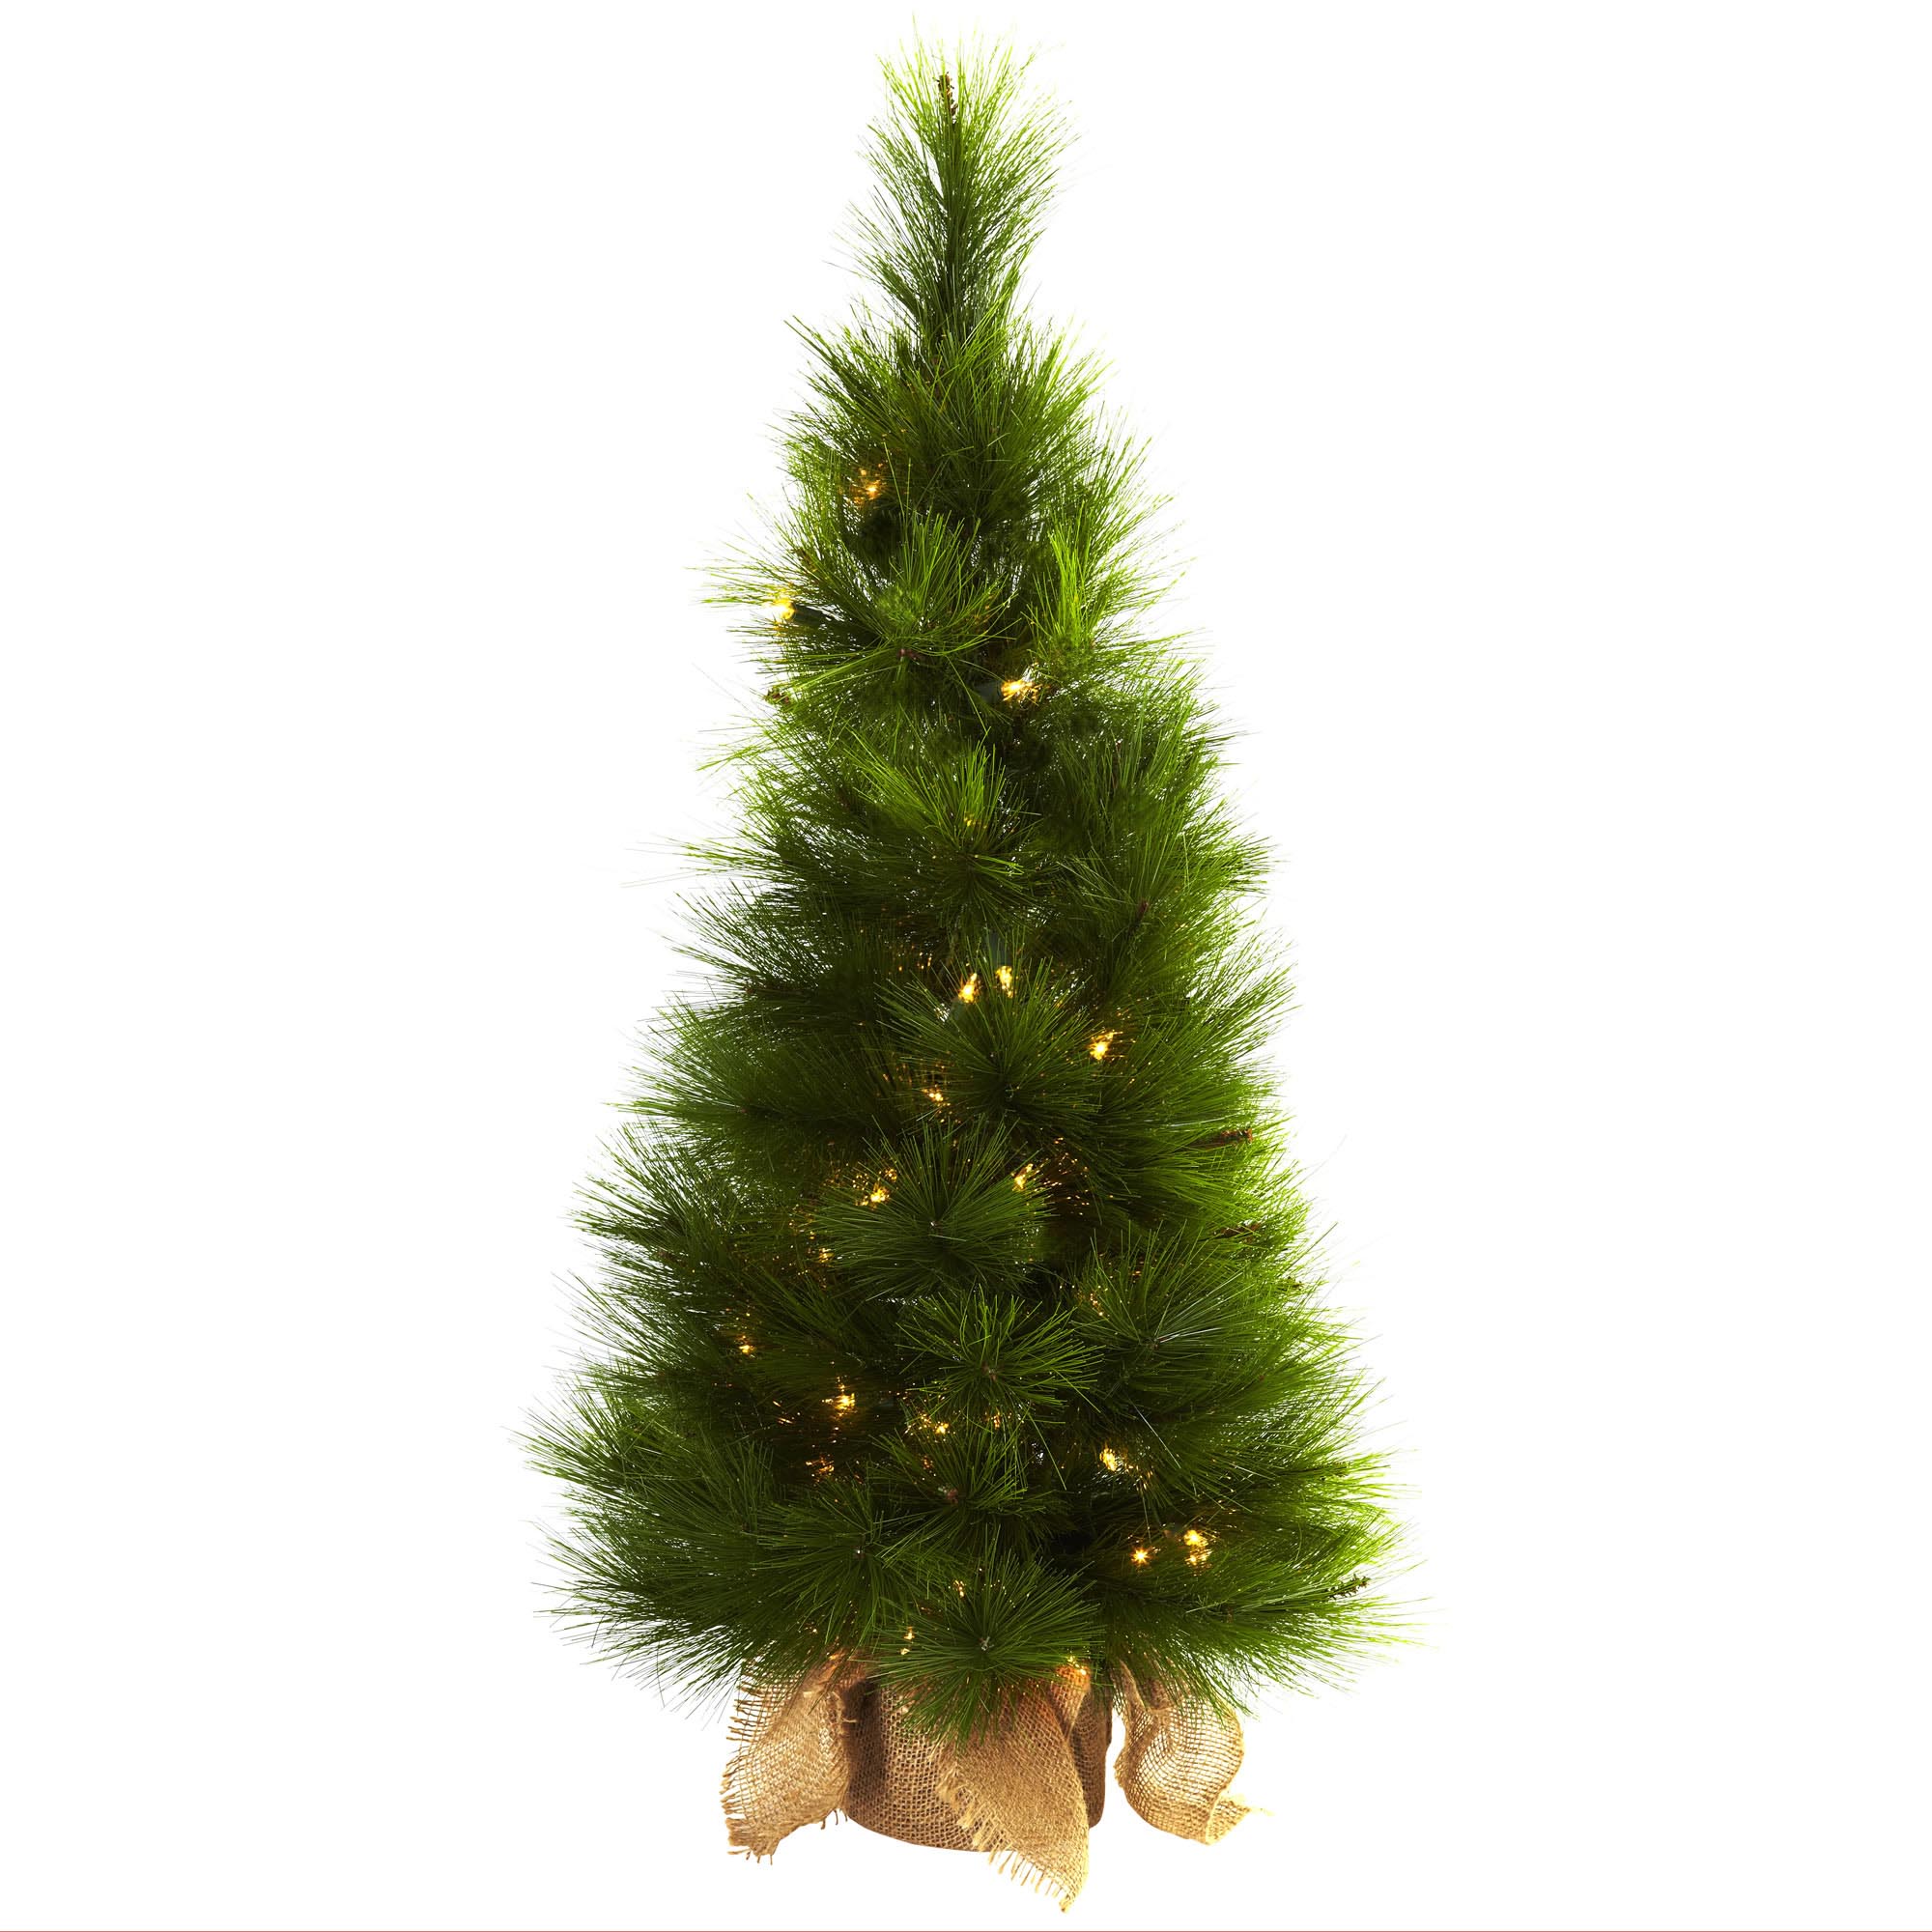 3 Foot Artificial Christmas Tree In Burlap Bag: Clear Lights